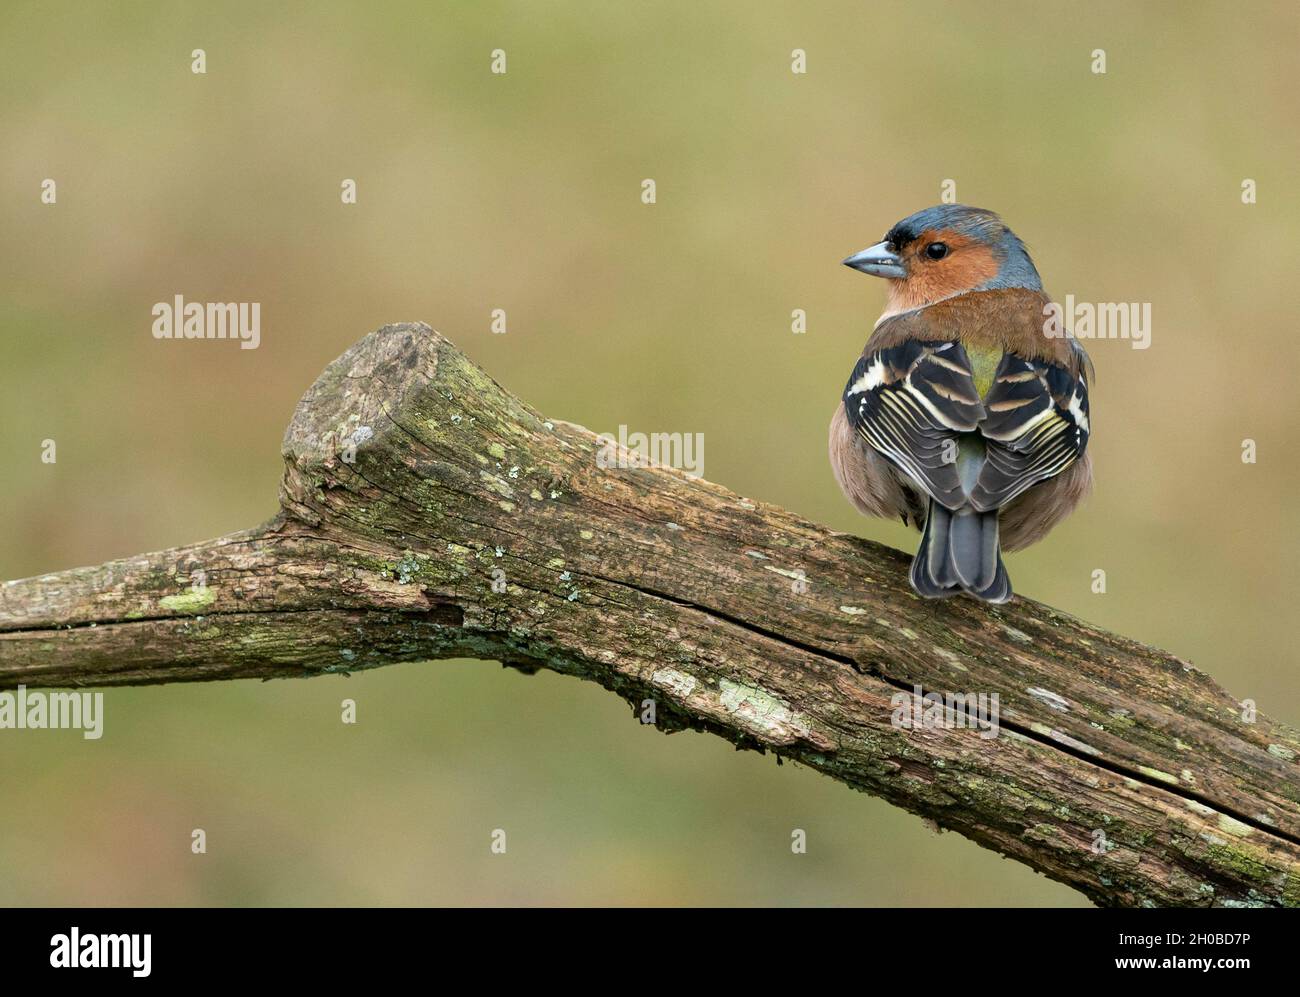 Chaffinch (Fringilla coelebs) perched on a branch, England Stock Photo